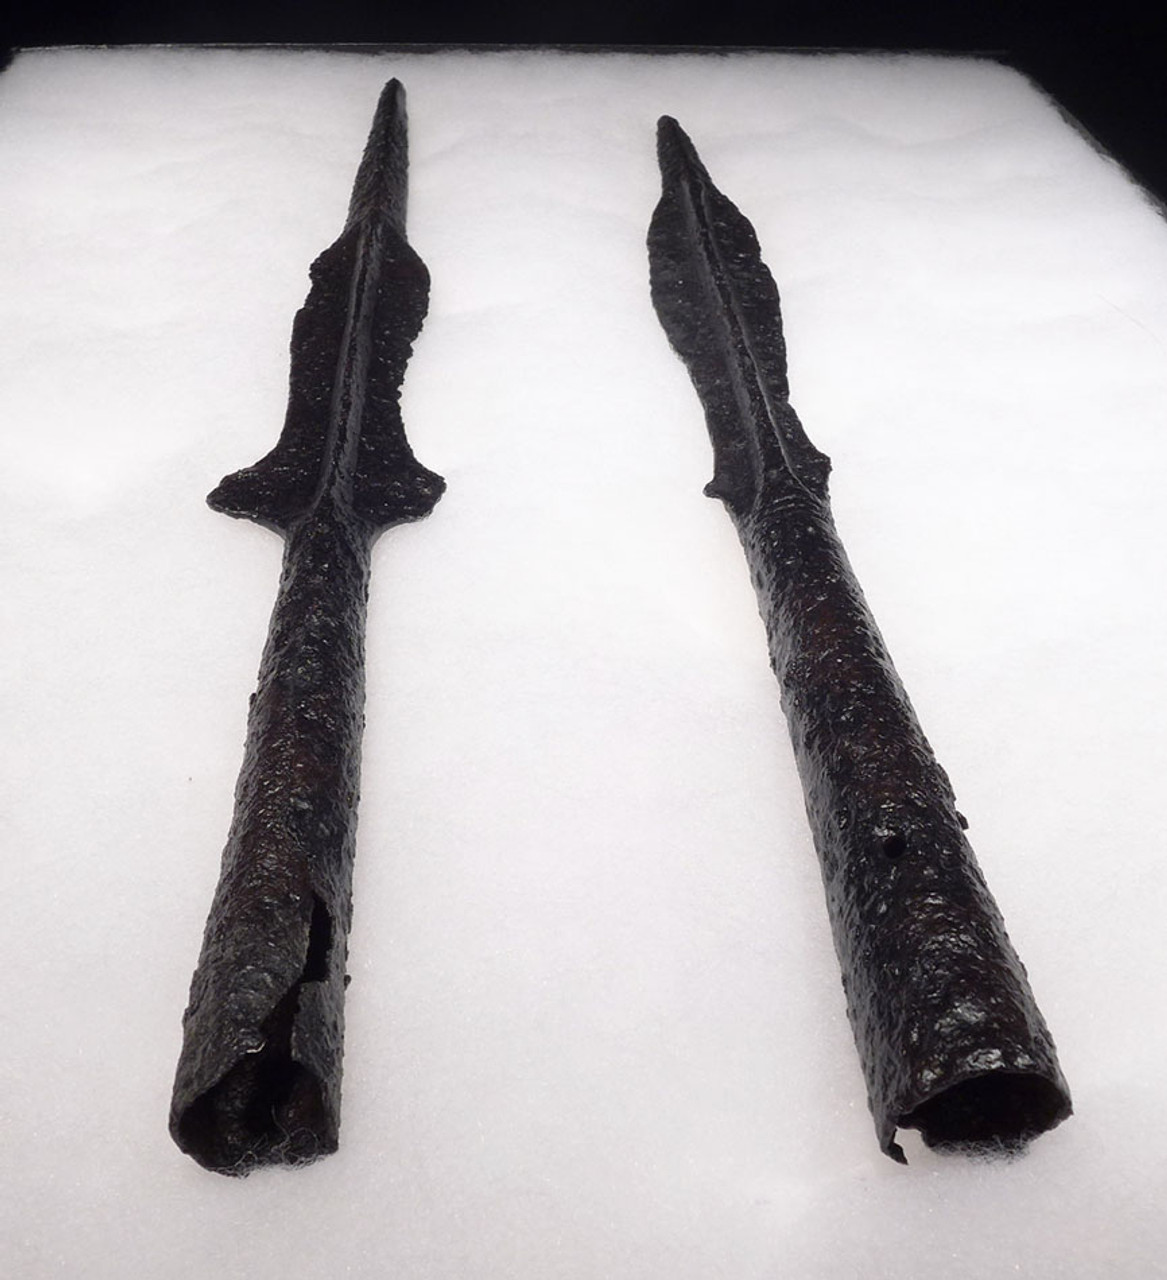 RARE MATCHED PAIR OF ANCIENT ROMAN BYZANTINE CAVALRY ARMOR-PIERCING LANCE SPEARHEADS *BYZR019